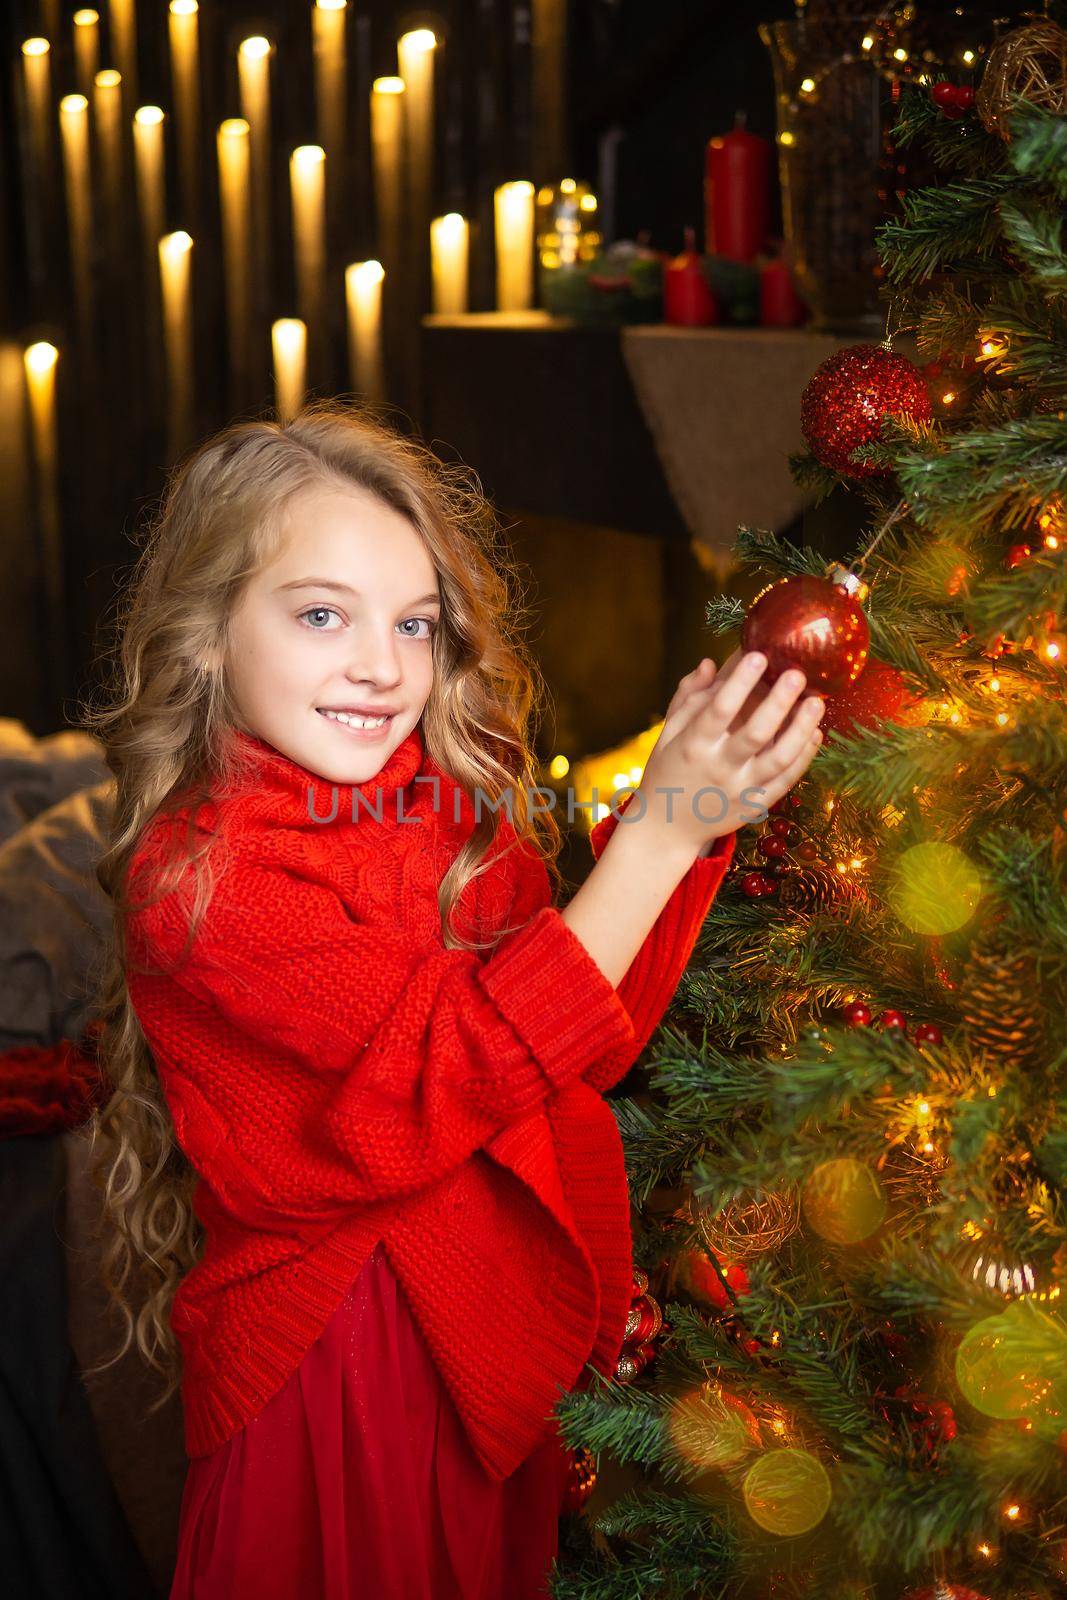 A blonde little girl in a festive outfit next to a Christmas tree decorated with garlands, glass bal by Annu1tochka